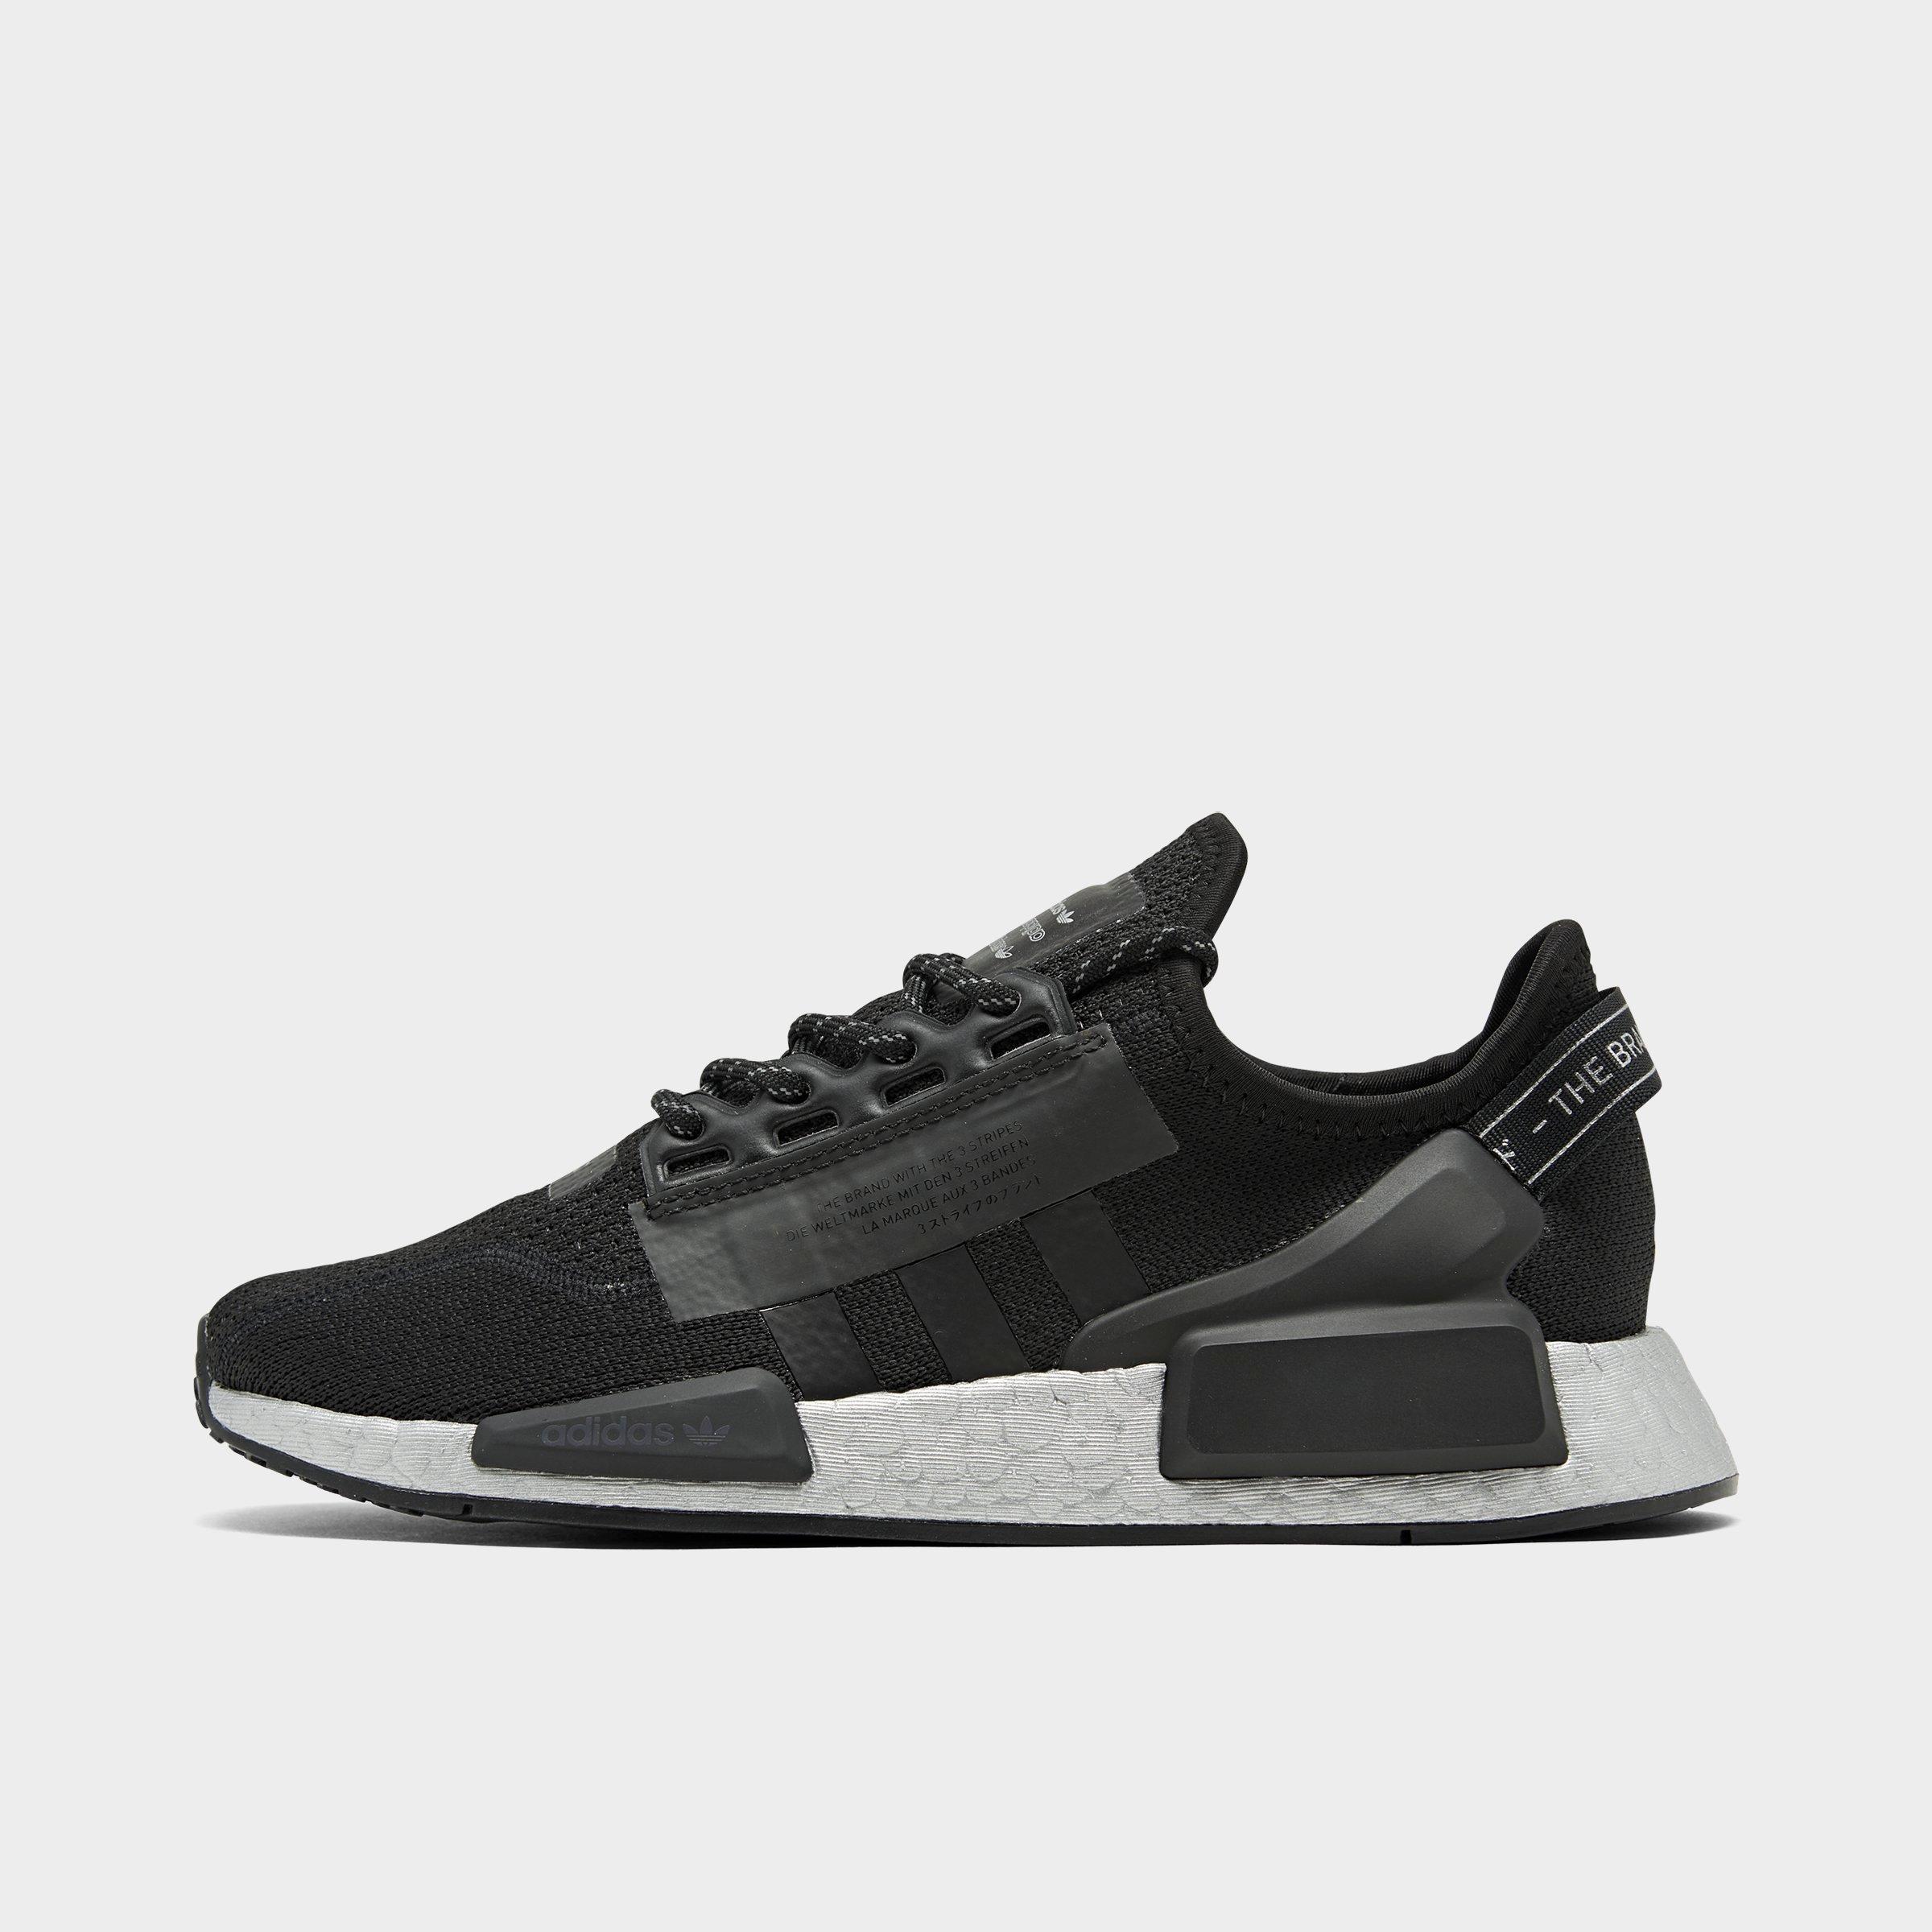 67% OFF adidas nmd r1 shoes to buy india twatncom